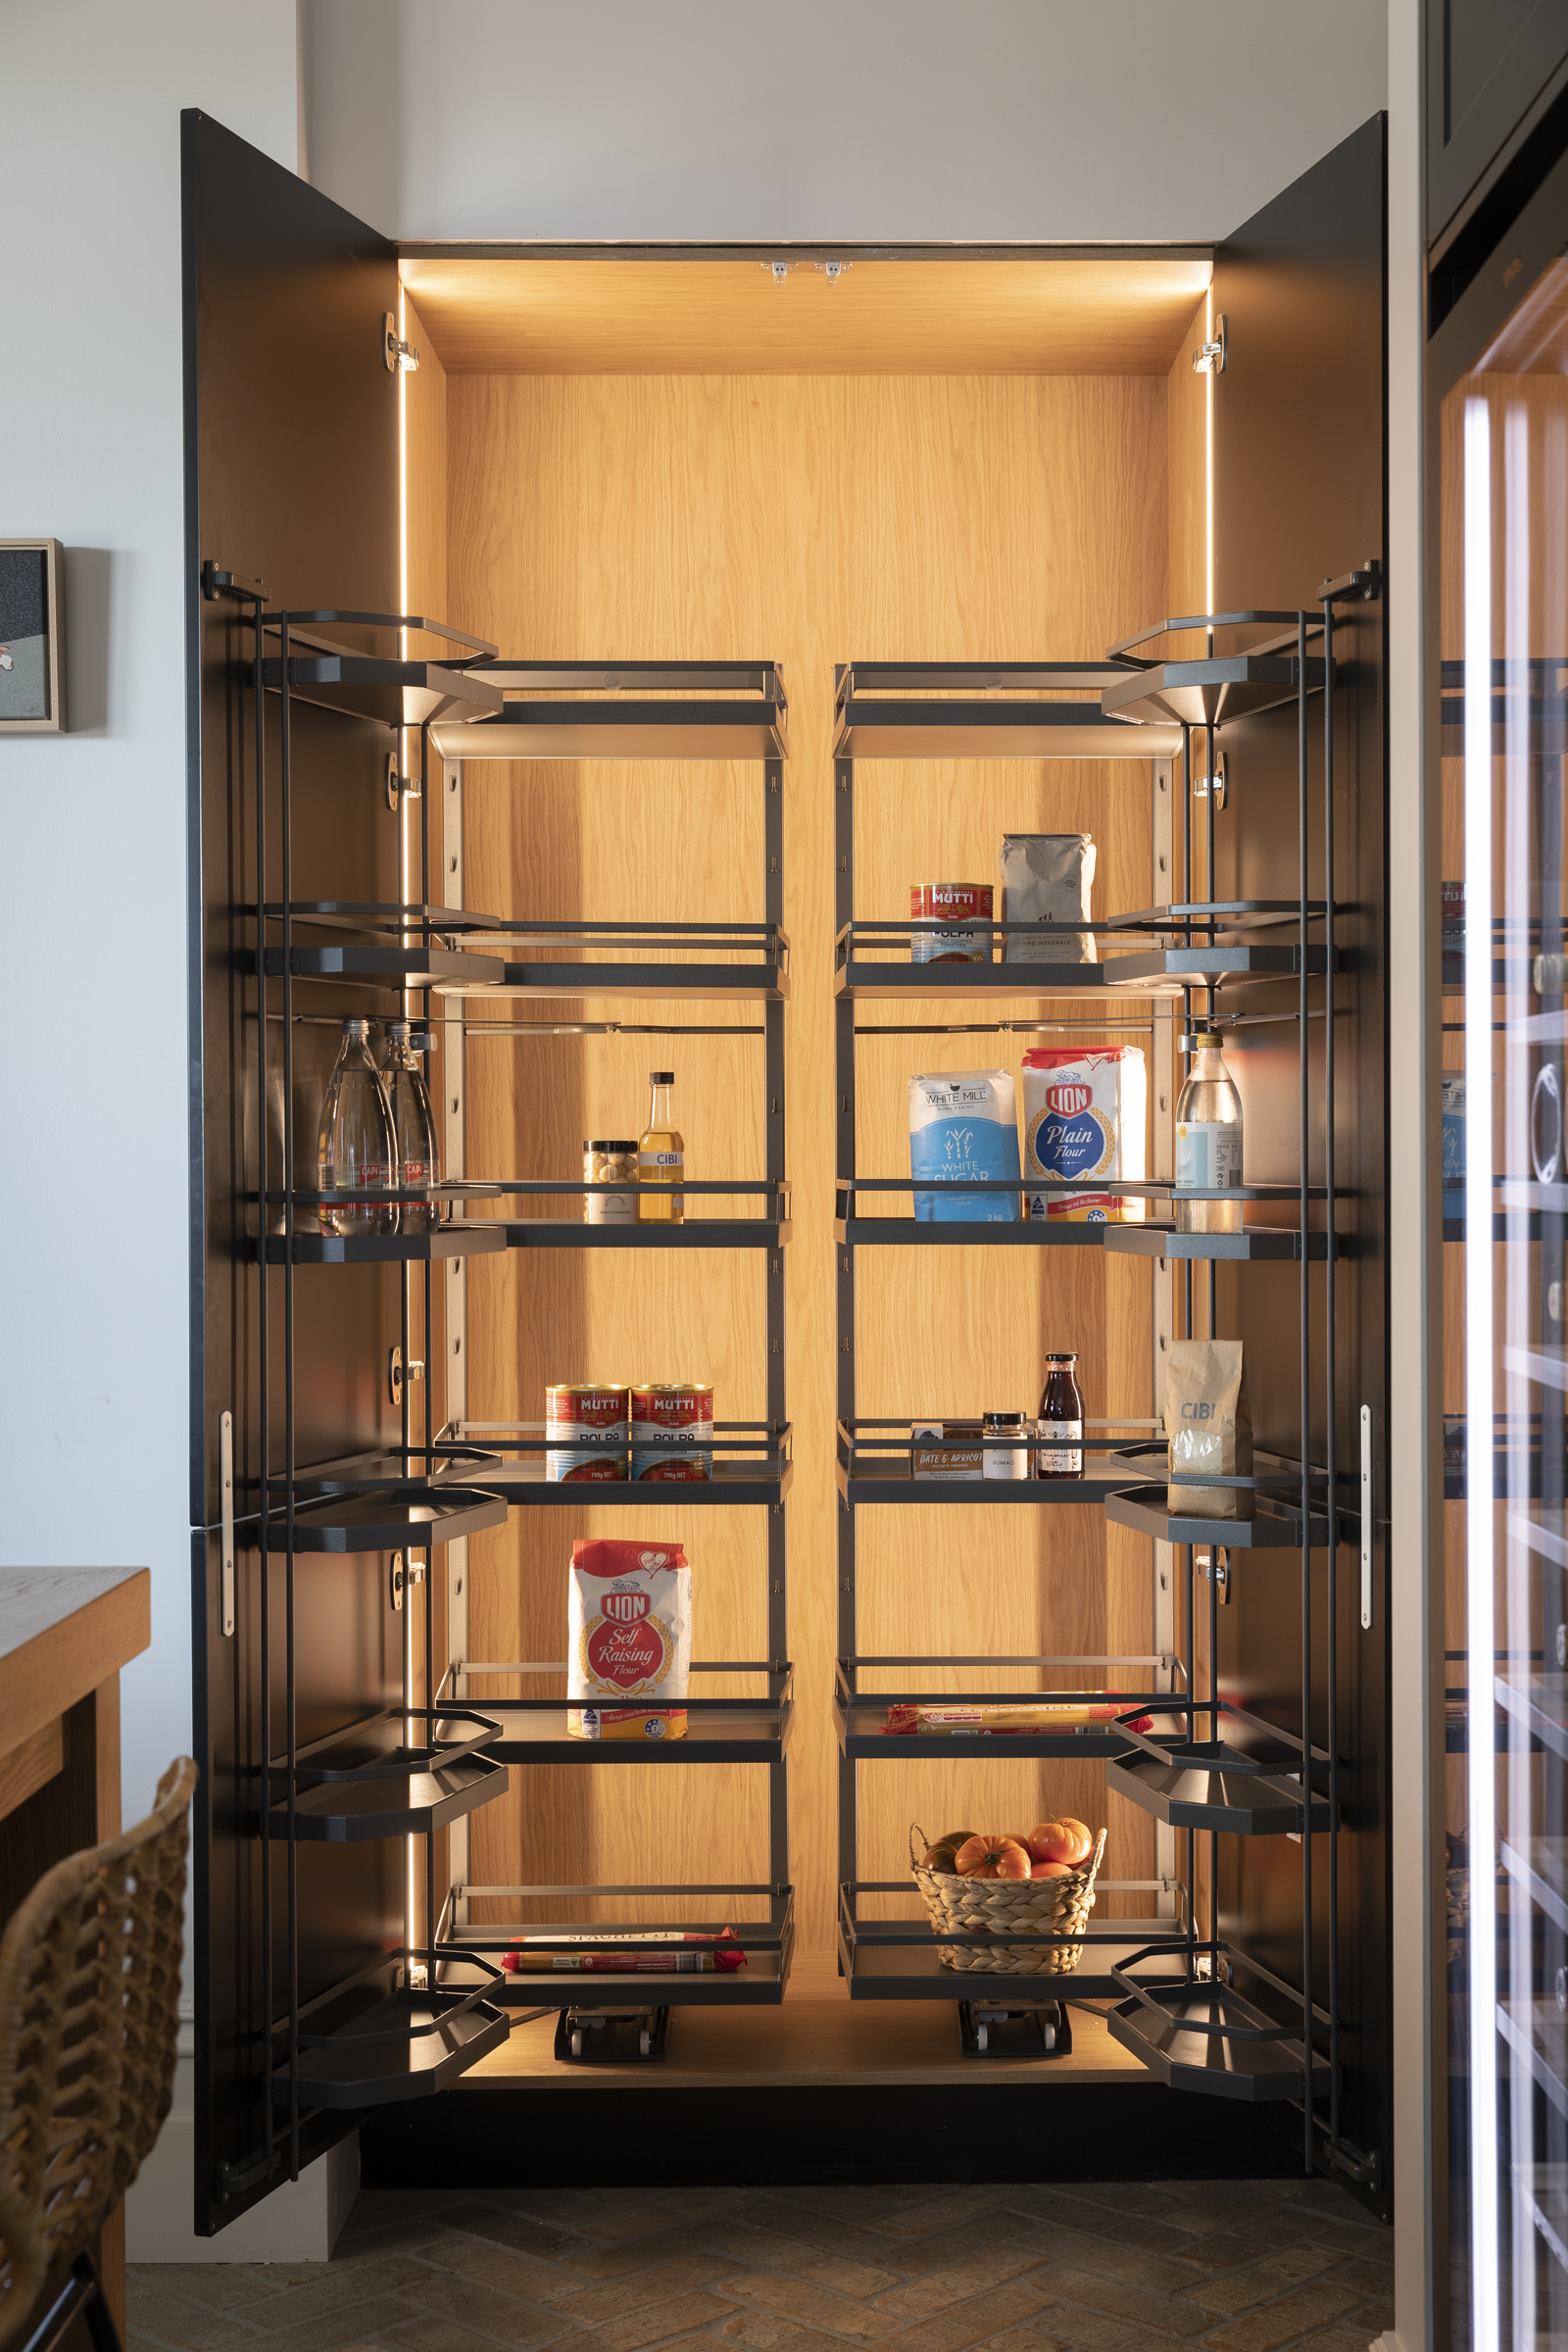  Internal storage solutions have been included to maximise functionality and ease of use. Simple yet effective, Inner Drawers and Cutlery Trays ensure drawers are easy to arrange and keep tidy, while Hettich AvanTech YOU drawers light up the contents within